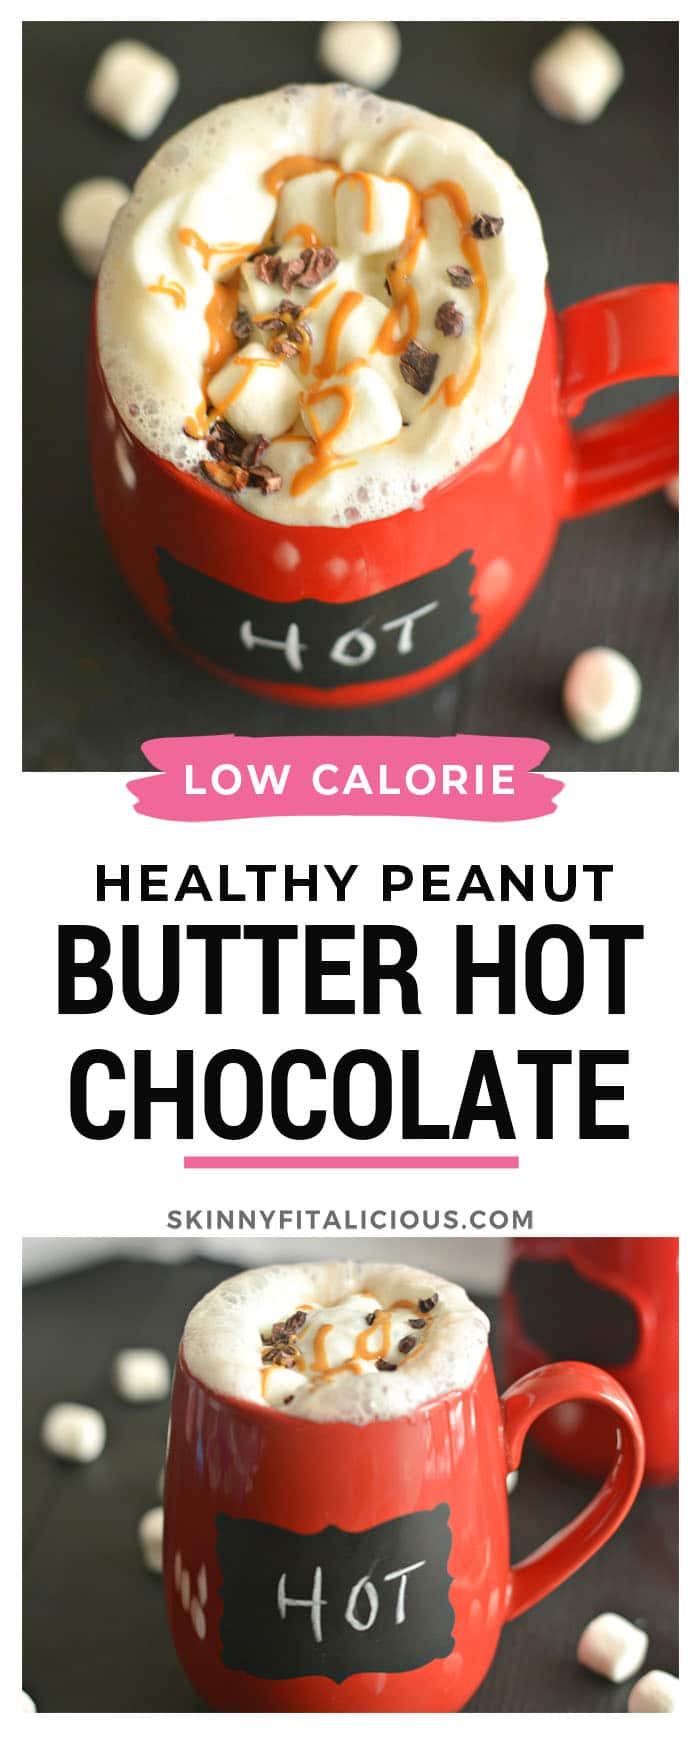 Healthy Peanut Butter Hot Chocolate is low calorie, dairy free and gluten free. A decadent and healthy hot chocolate recipe!